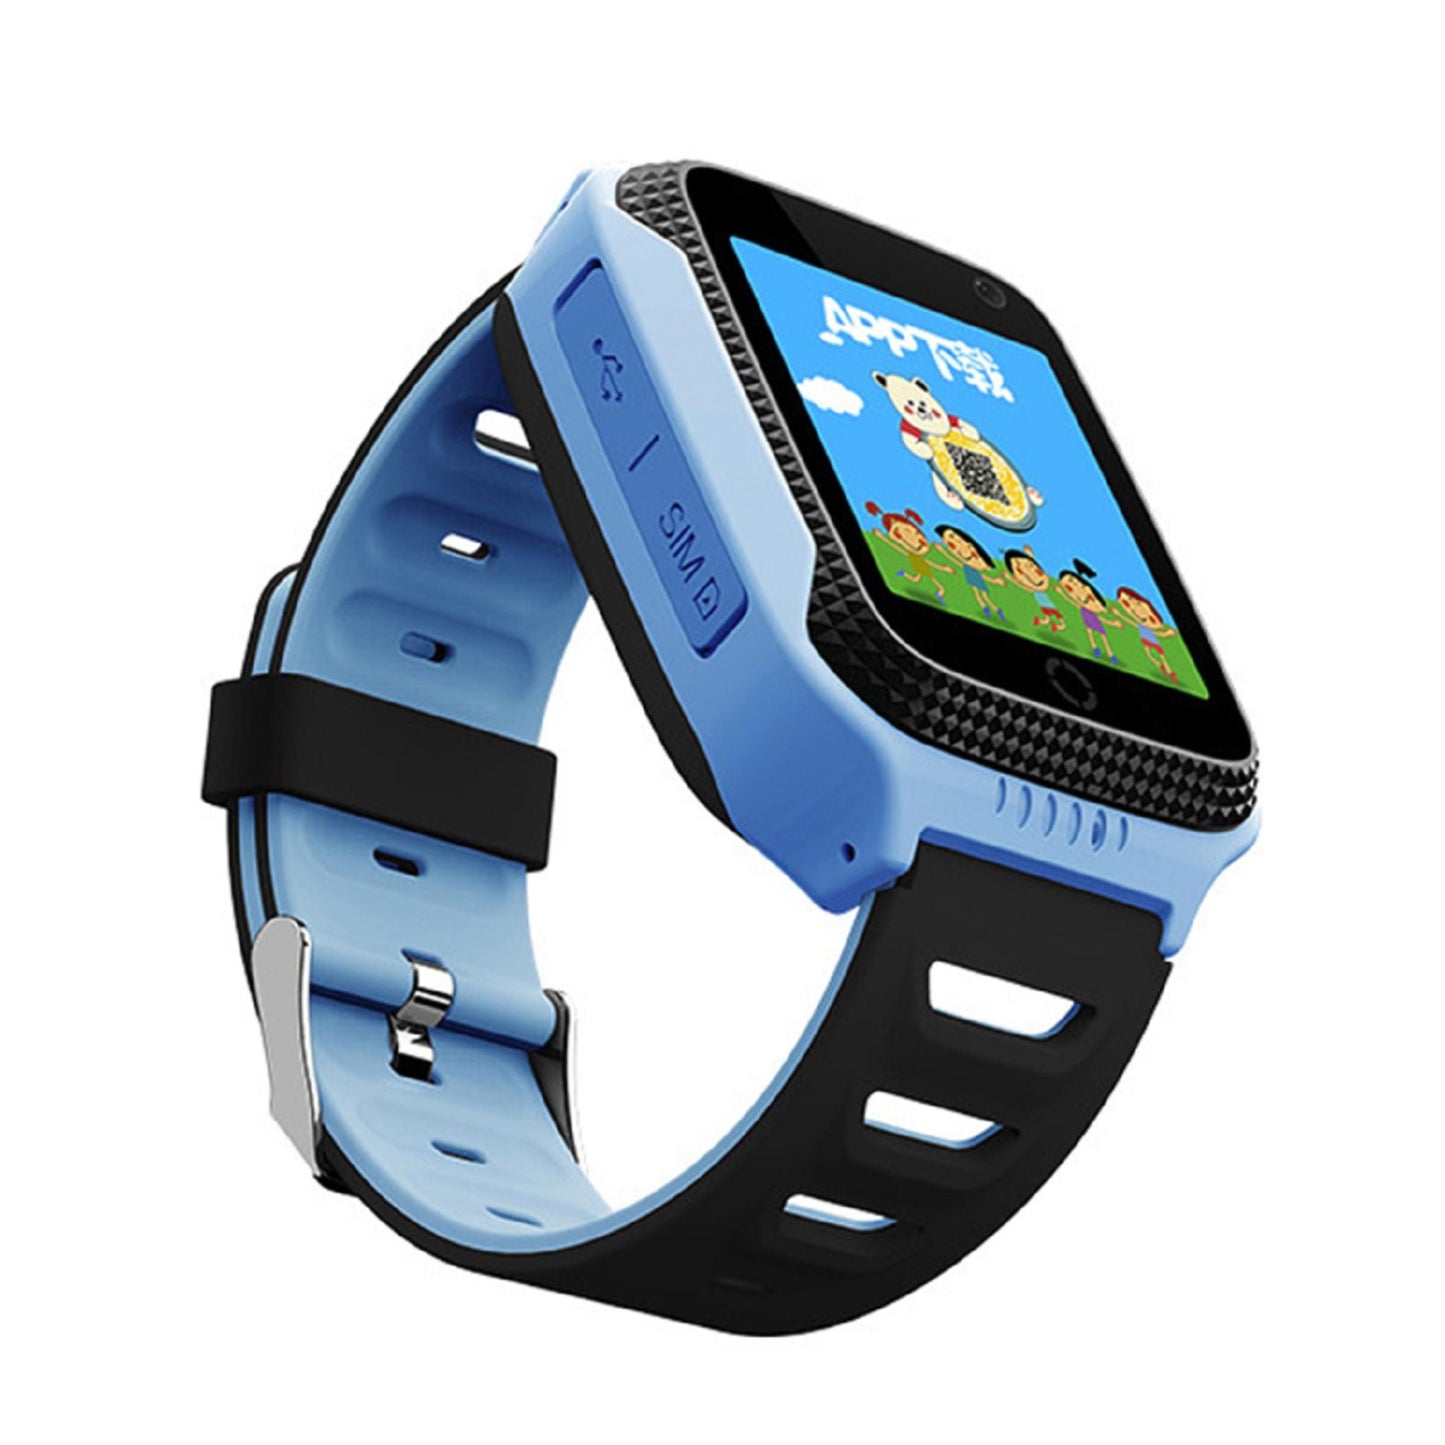 Karen M G900A Kid's Smartwatch with 1.44-inch TFT Screen, GPS, 2G Supported, 400mAh Battery. | Blue Chilli Electronics.